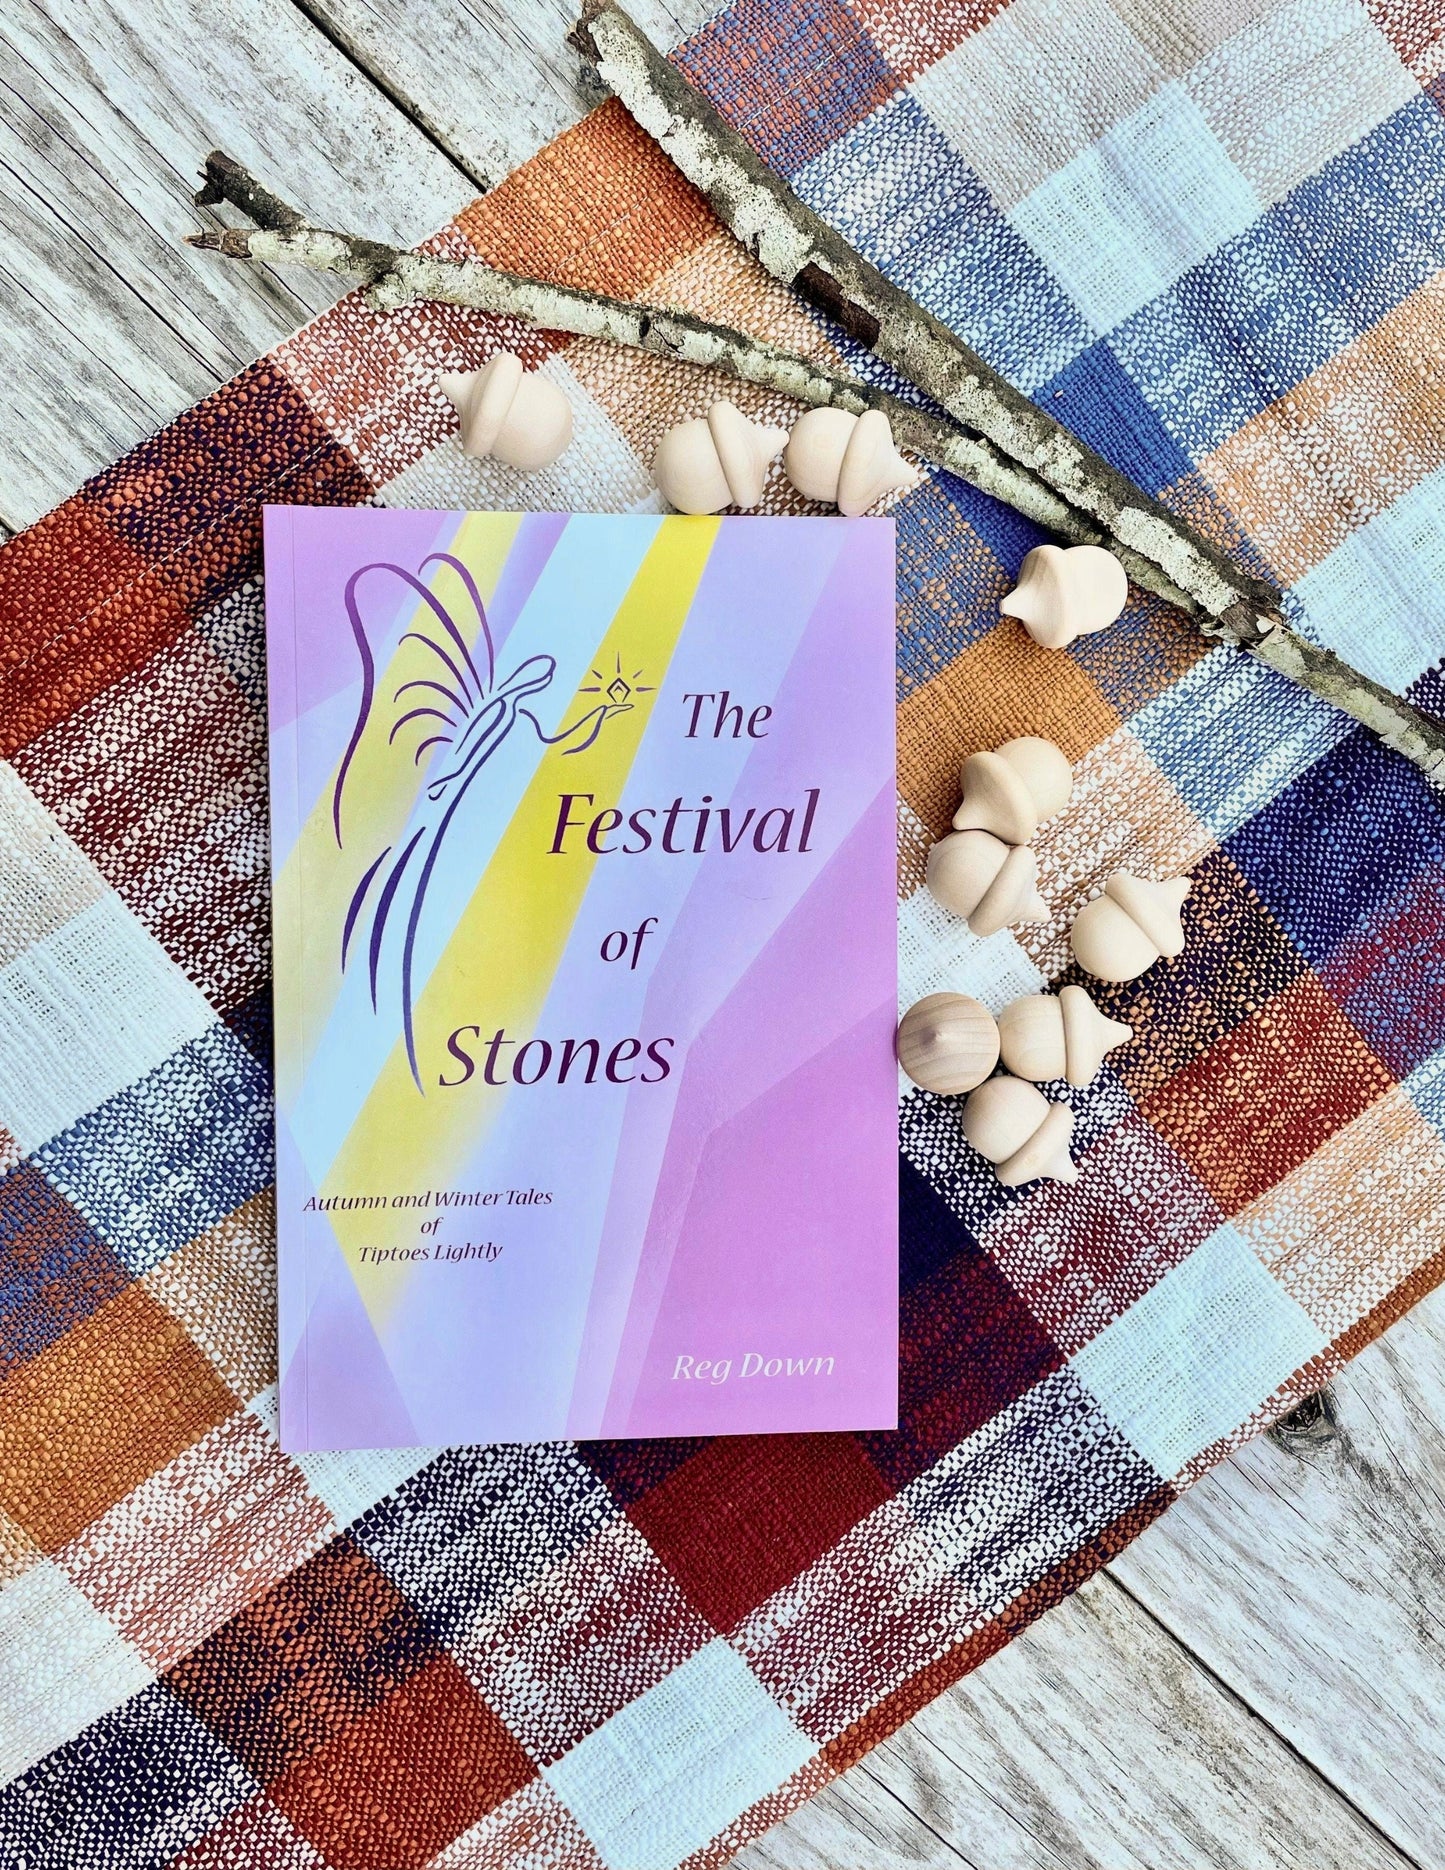 The Festival of Stones Autumn and Winter Tales of Tiptoes Lightly - Alder & Alouette